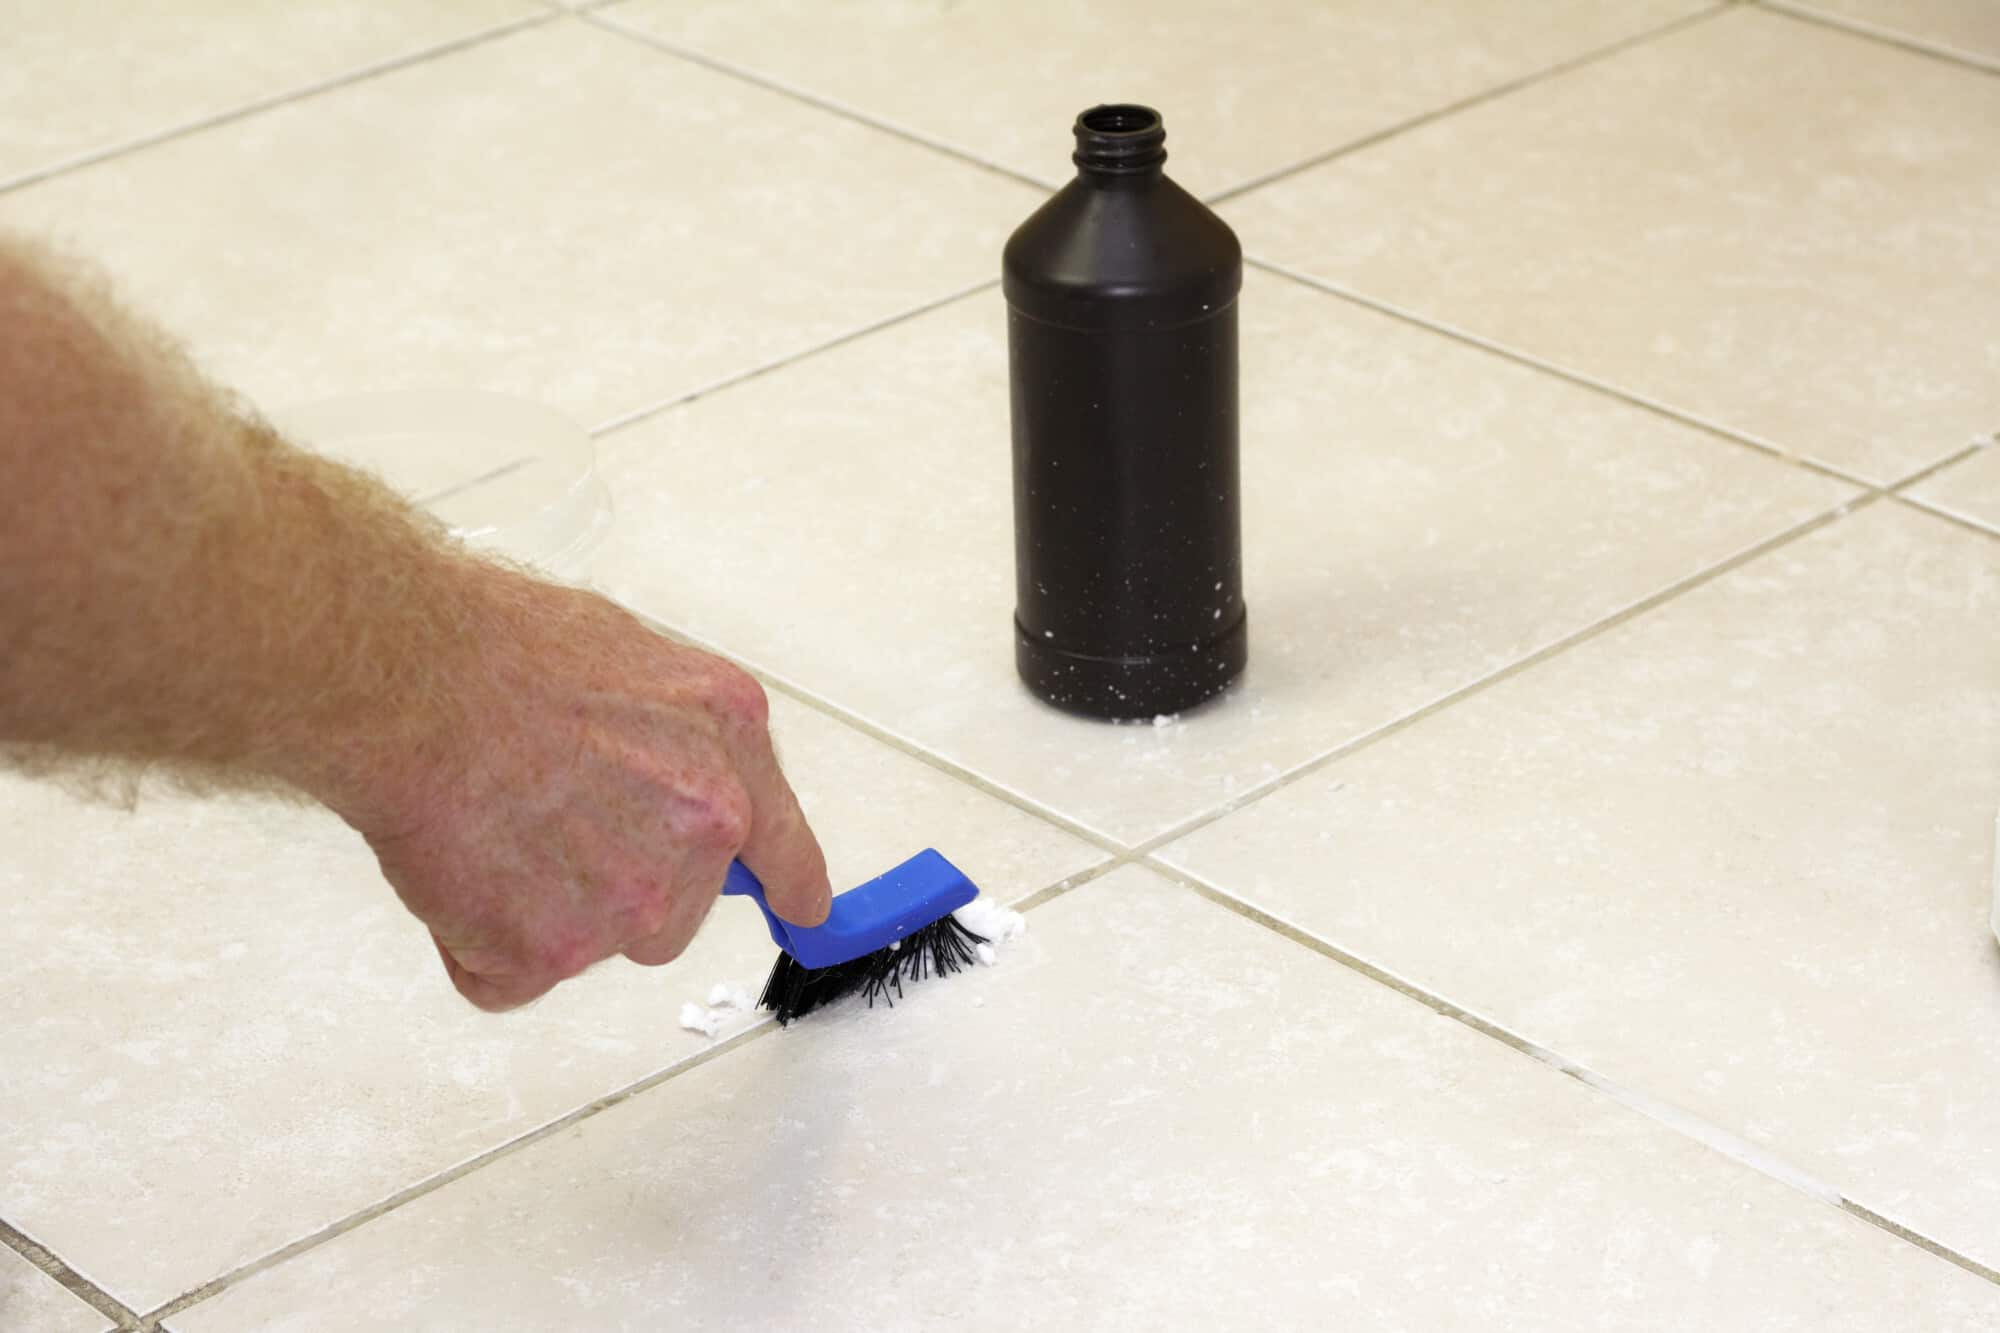 Hand with a blue handled black scrub brush cleaning grout with baking soda and peroxide. Floor grout tile being cleaned with baking soda and hydrogen peroxide.